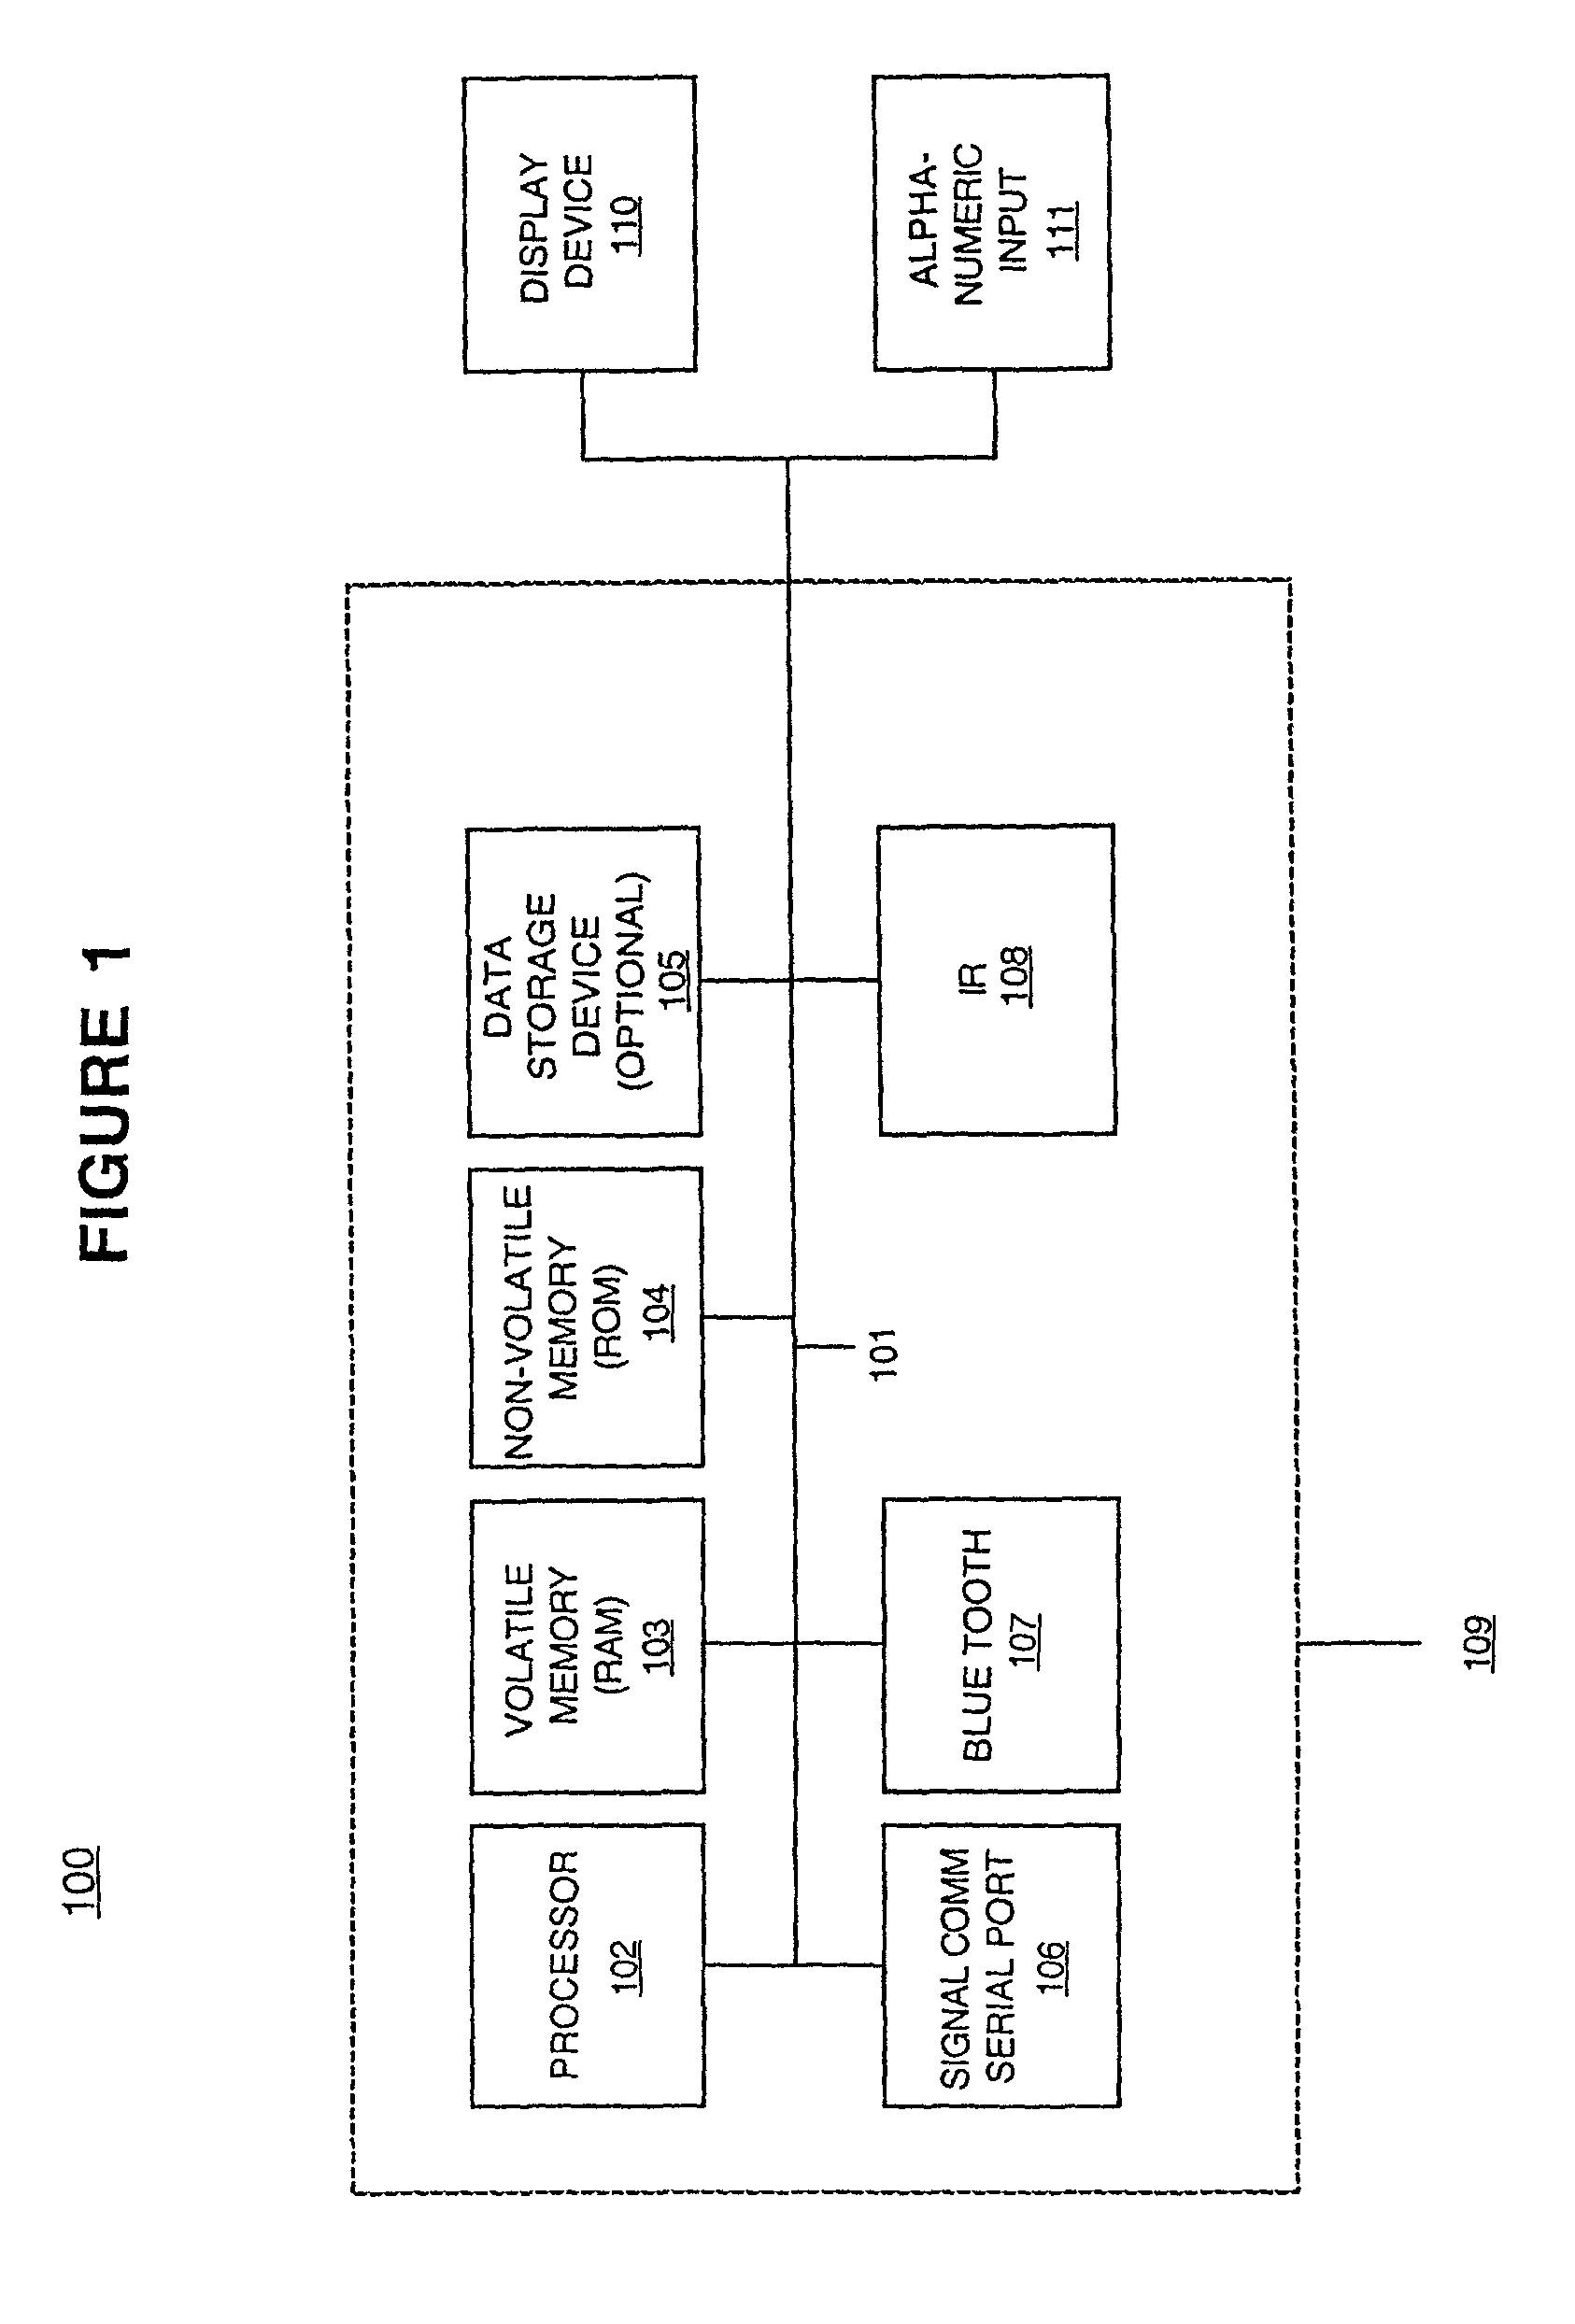 Method for selecting and configuring wireless connections in an electronic device